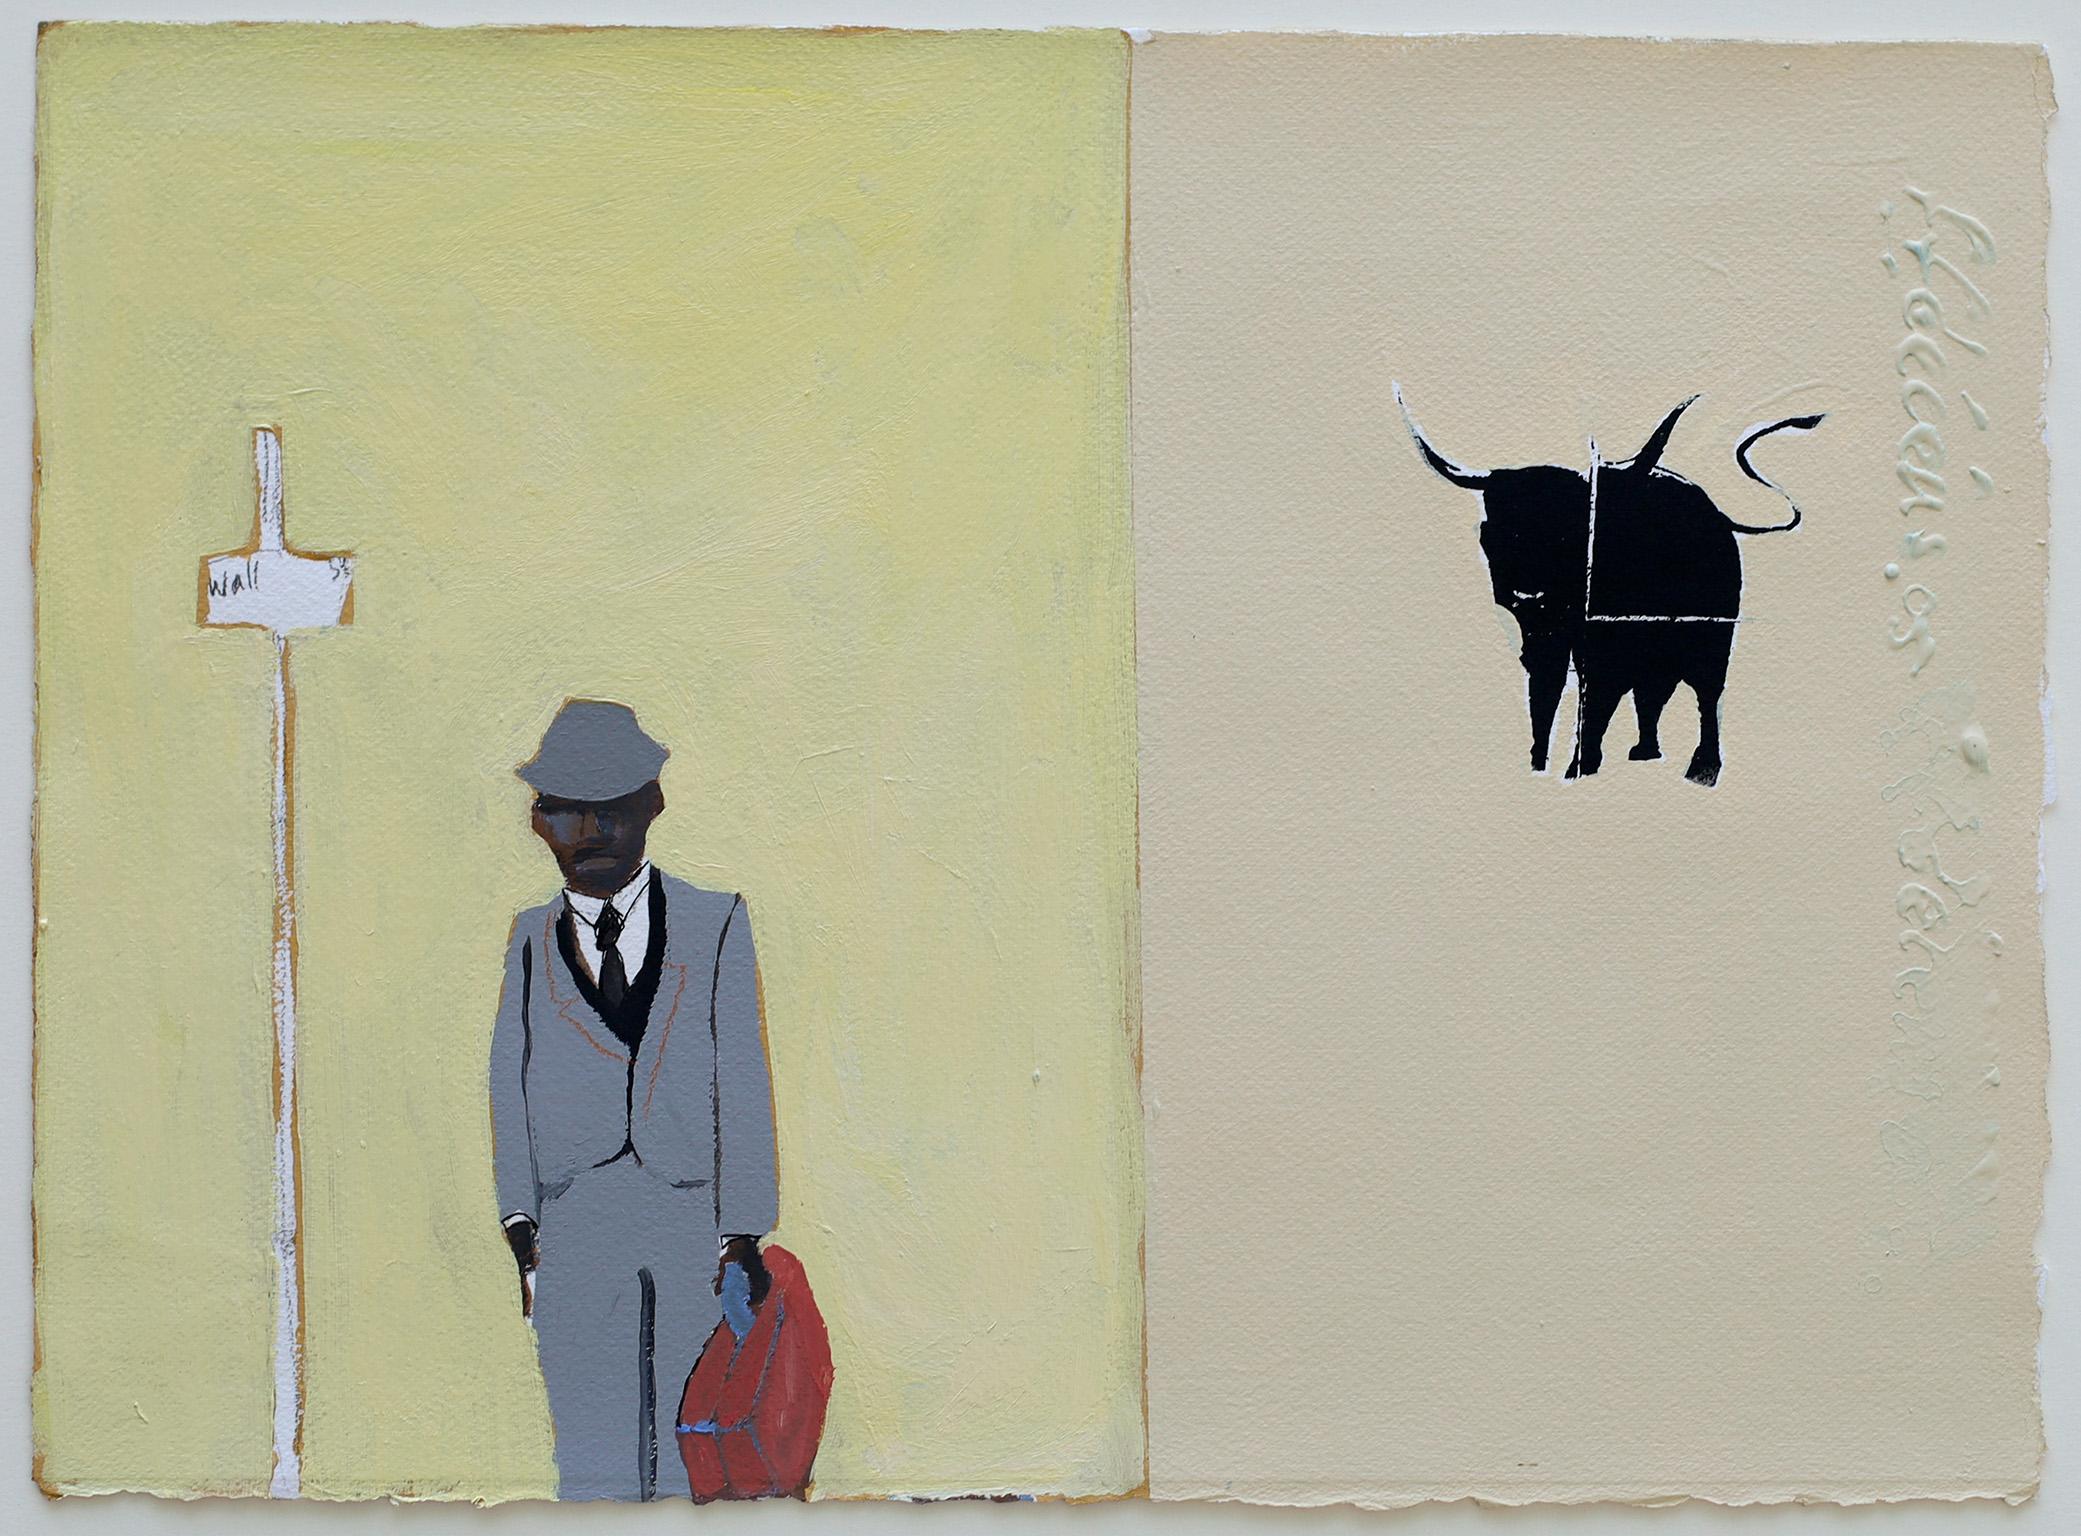 Francks Deceus Figurative Painting - Morning Bell - Work on Paper About the African American Great Migration to North